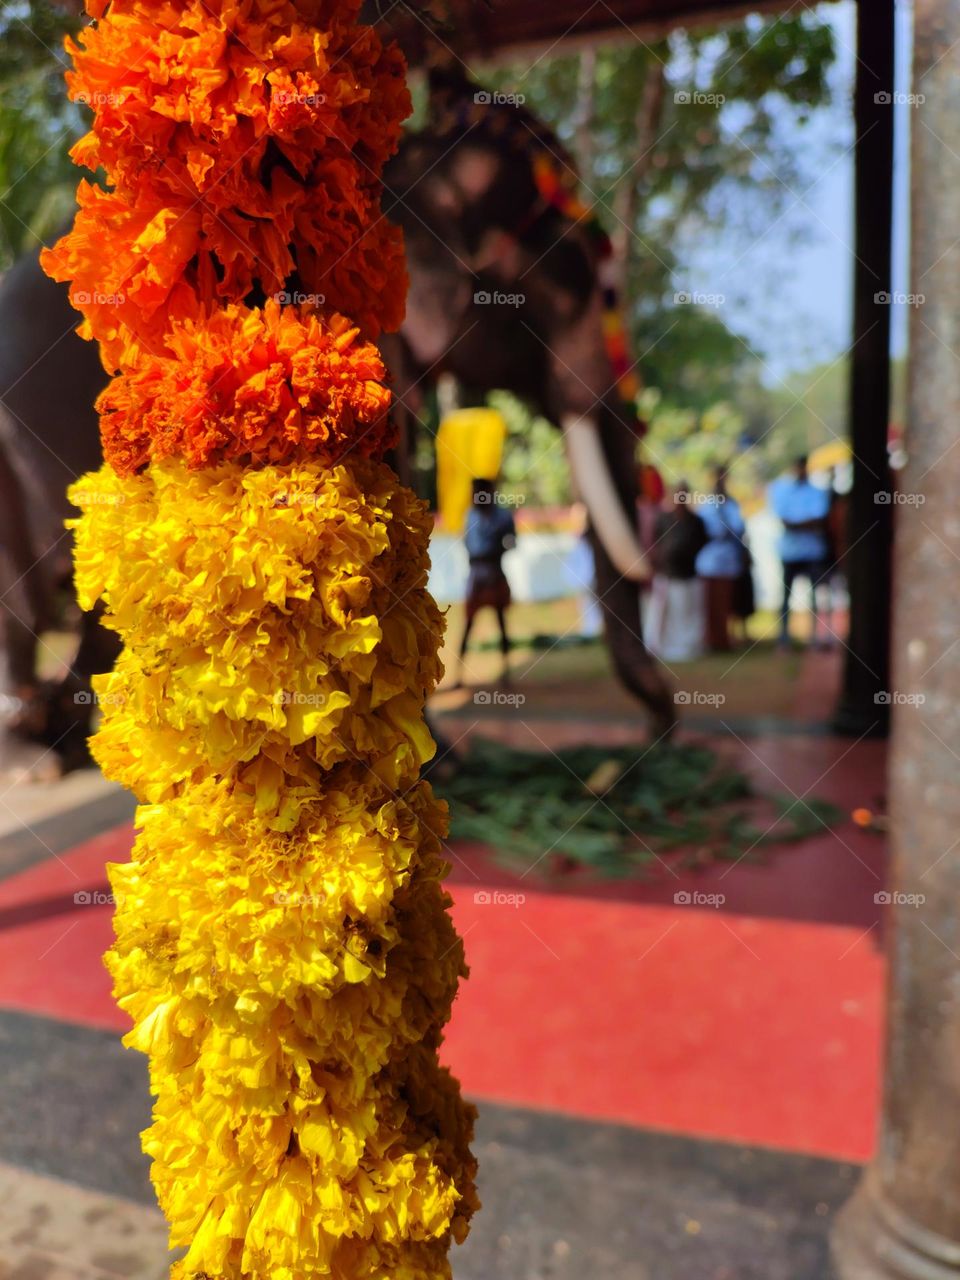 Indian Festivals, Focus on the orange yellow flower garland and blurred elephant on the back